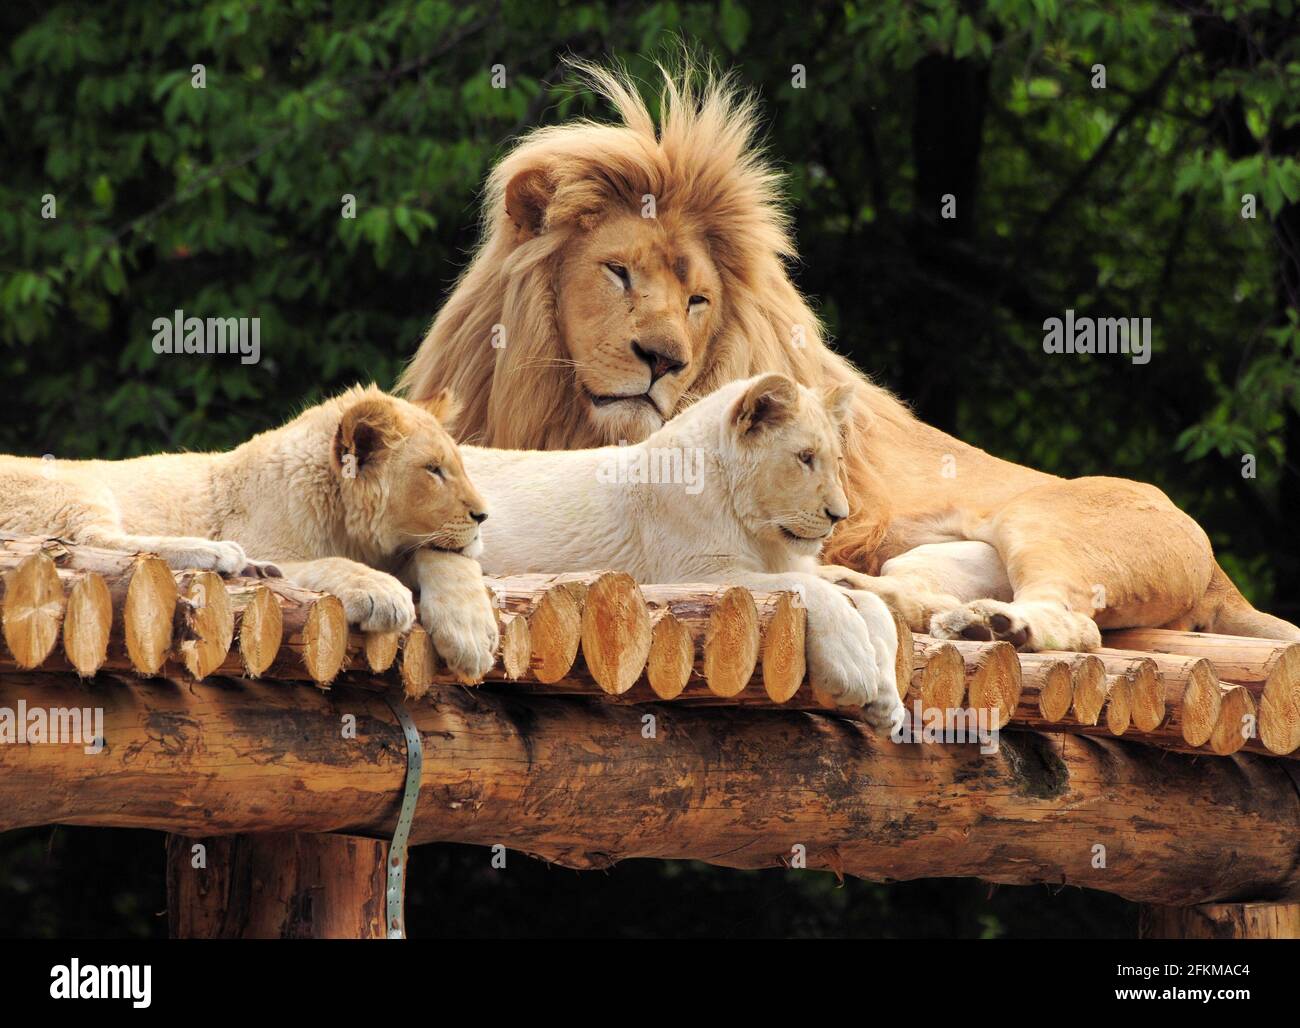 Male Lion With Two Baby Lions Resting On A Wooden Roof On A Sunny Spring Day Stock Photo